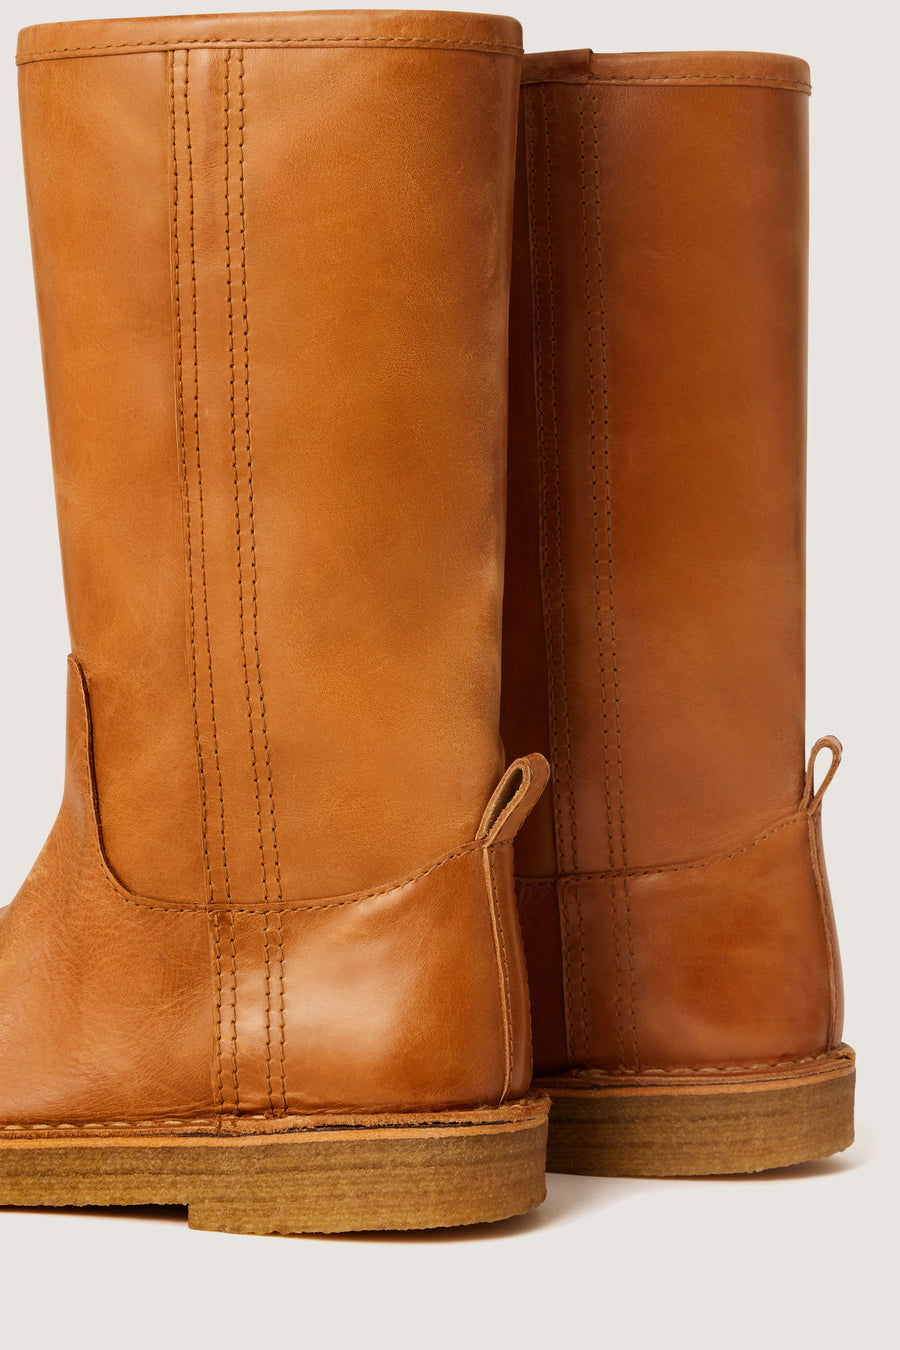 SAUVAGE BOOTS